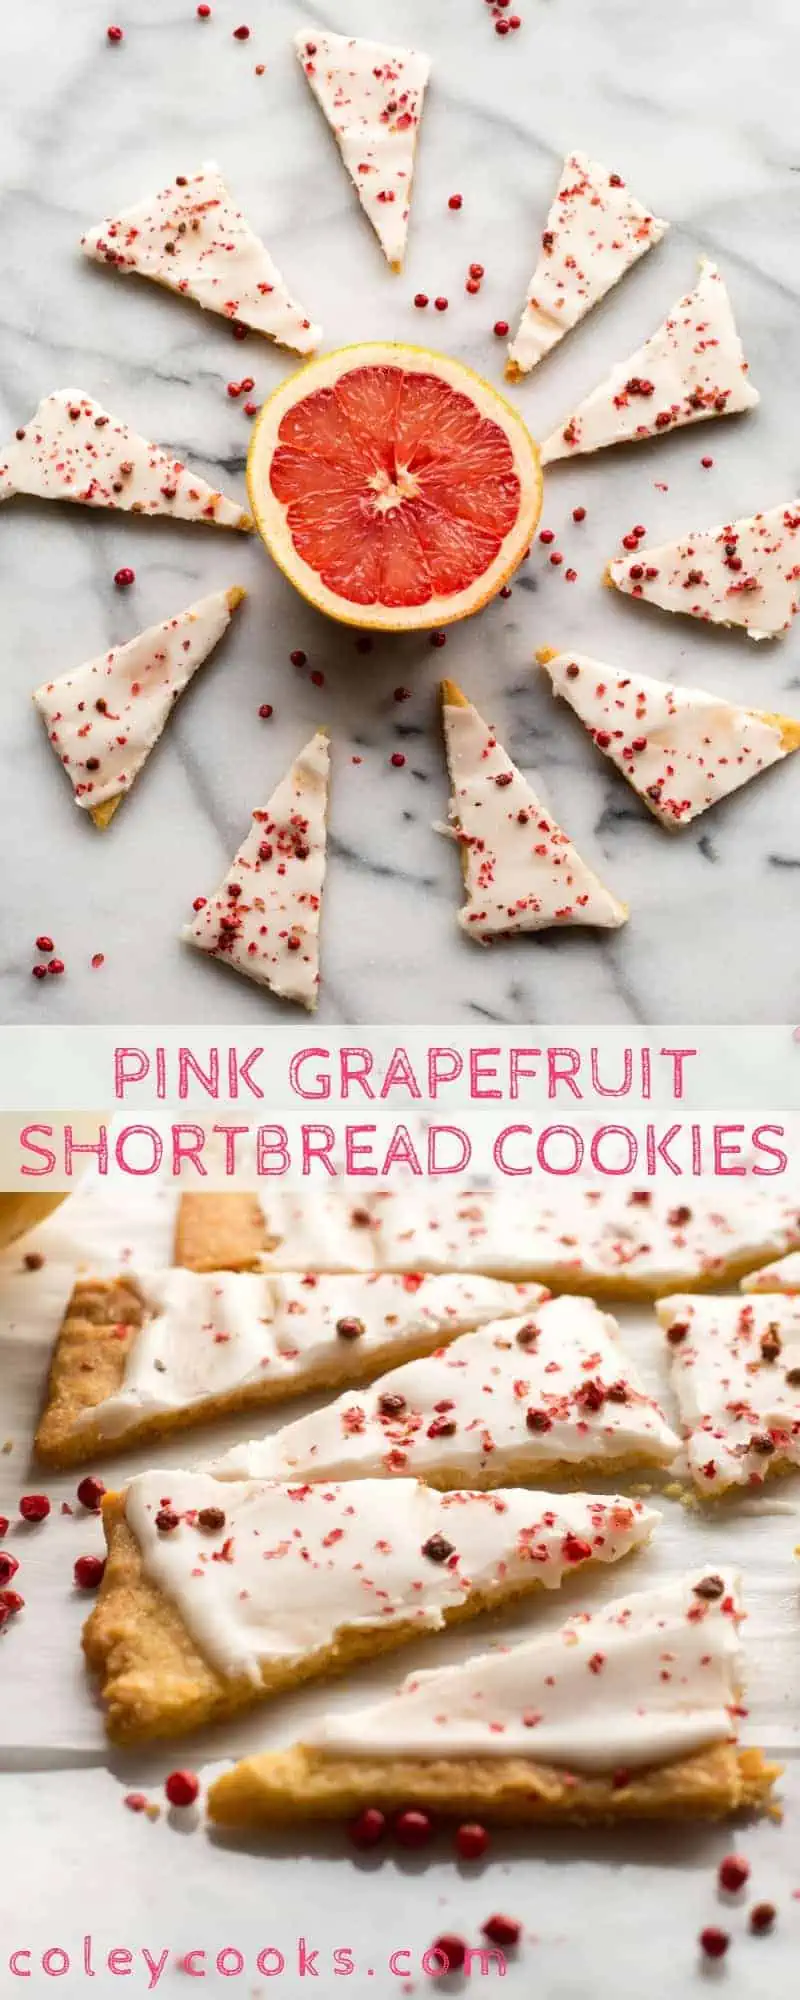 These Pink Grapefruit Shortbread Cookies are buttery, tangy, zesty, lightly sweetened and super easy to make! #easy #grapefruit #shortbread #recipe #citrus #cookies #dessert | Coleycooks.com